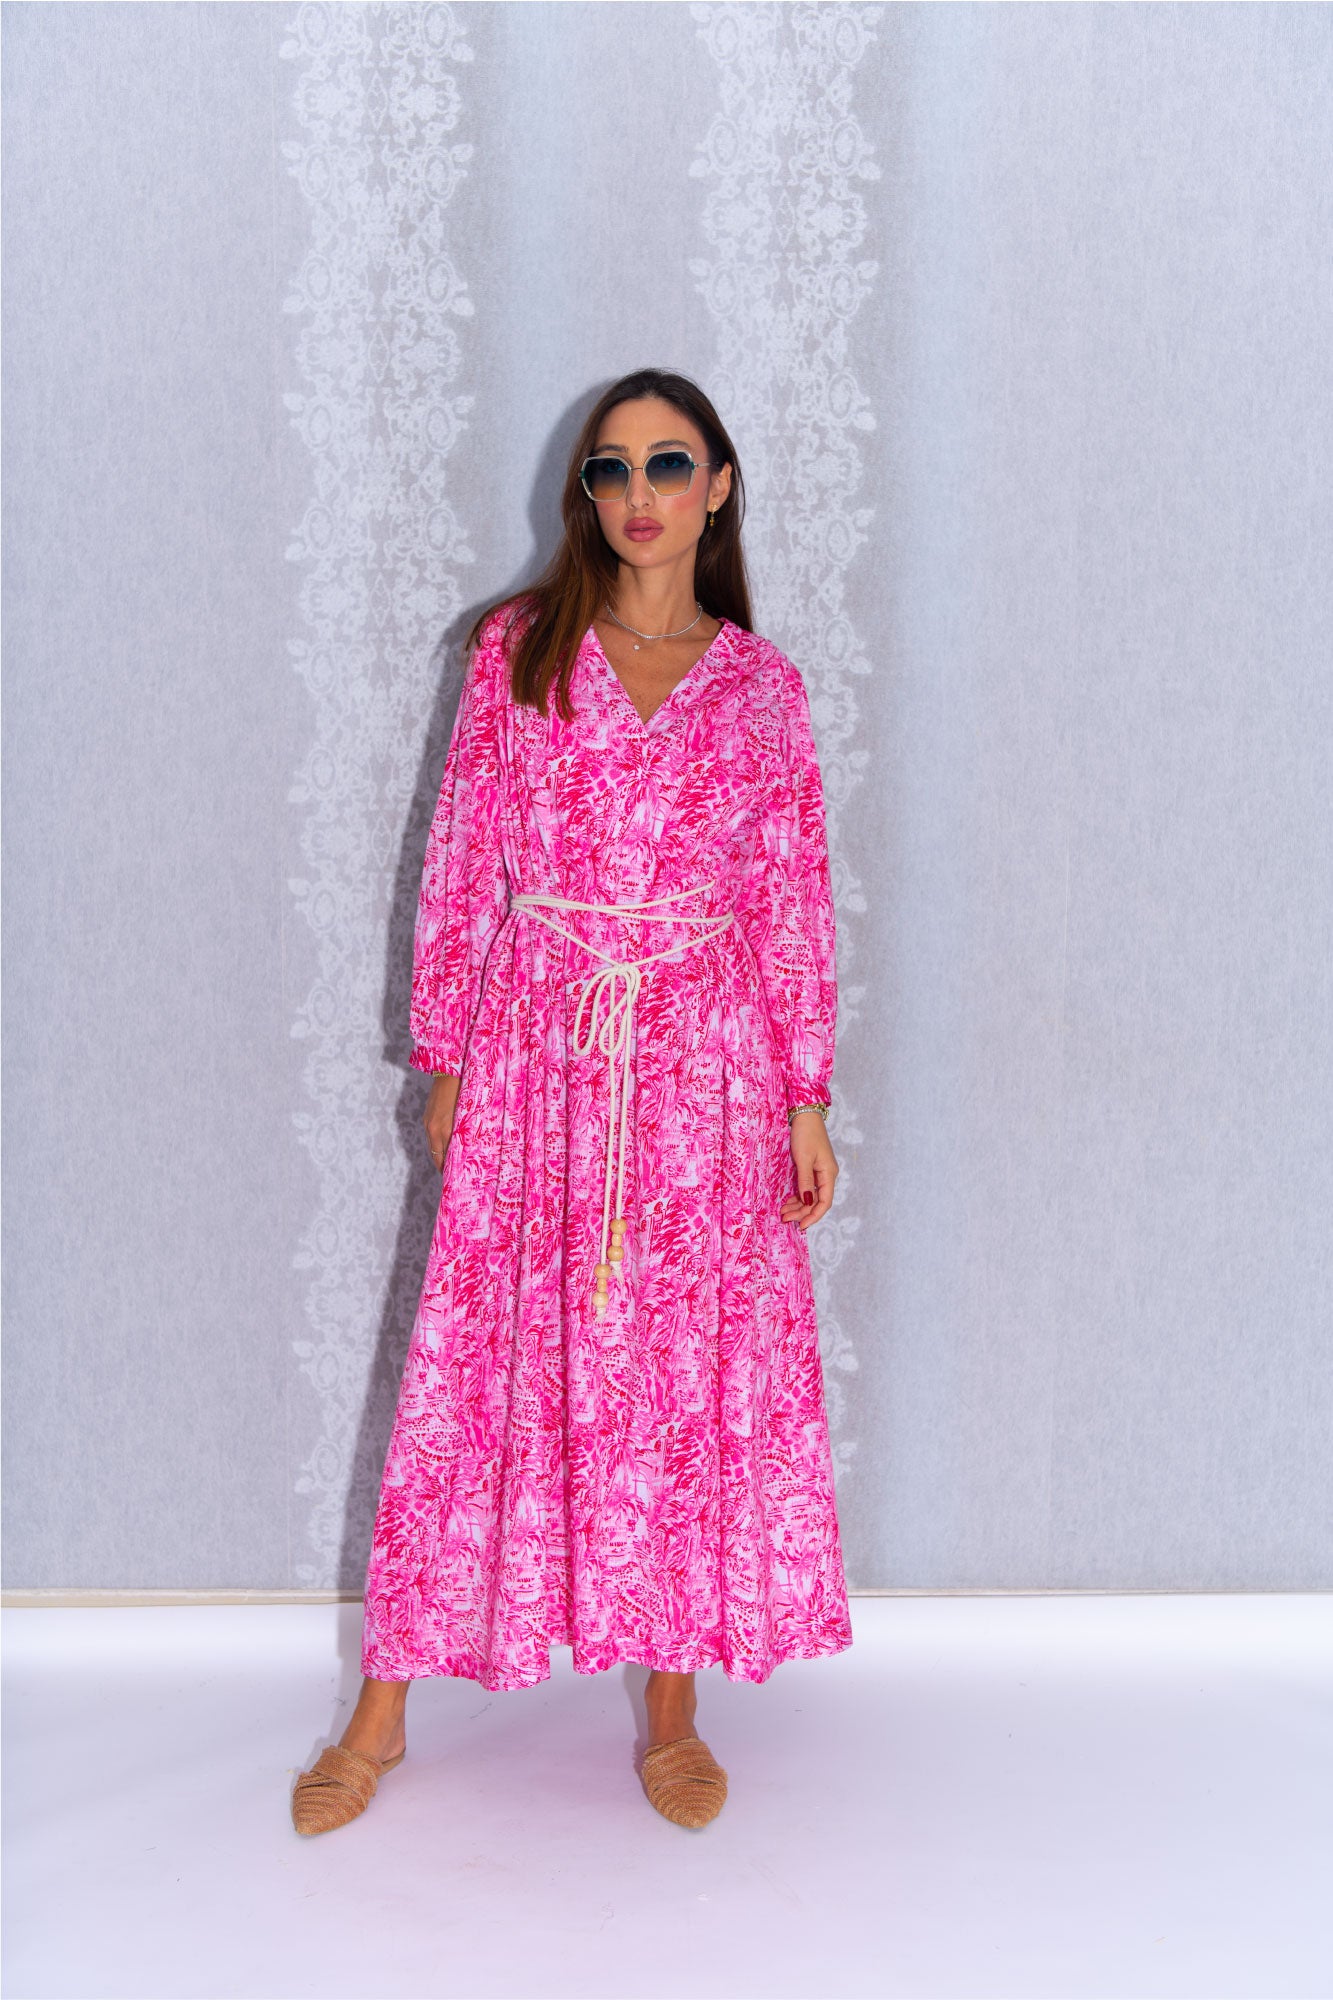 Vibrant Pink Belted Abaya - Bright and Flowy Dress